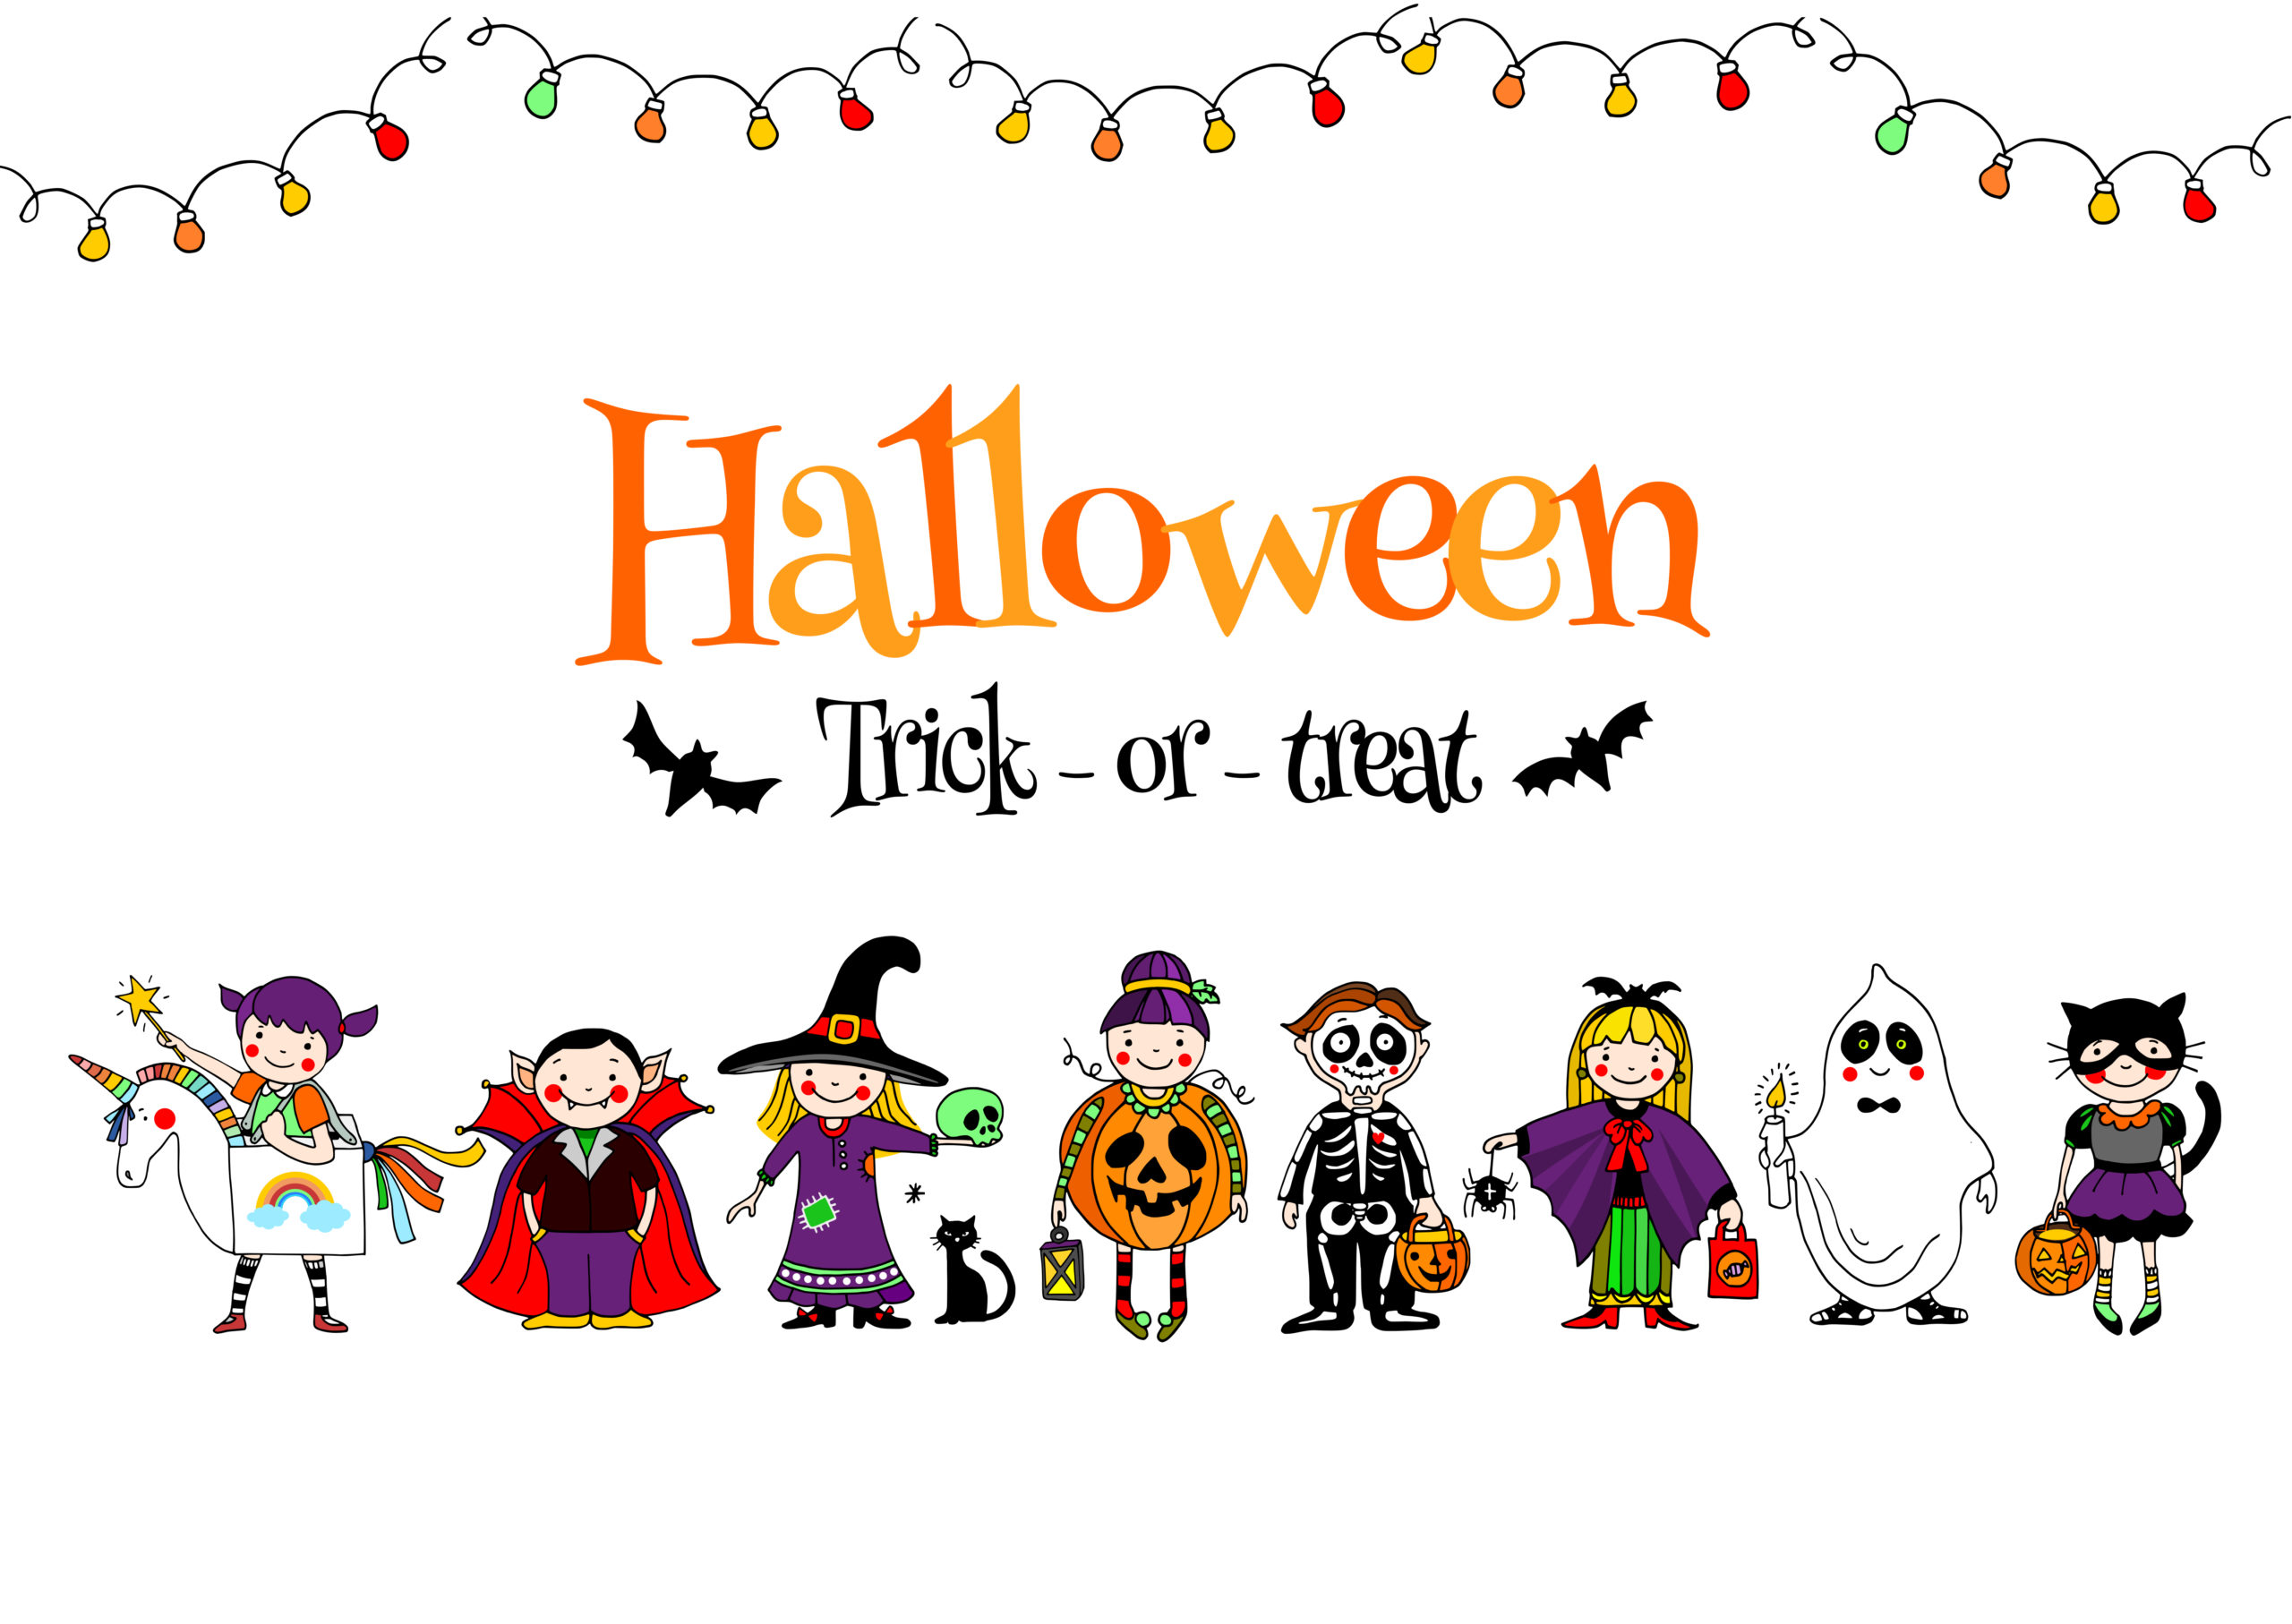 Trick-or-Treat - Summerville Library